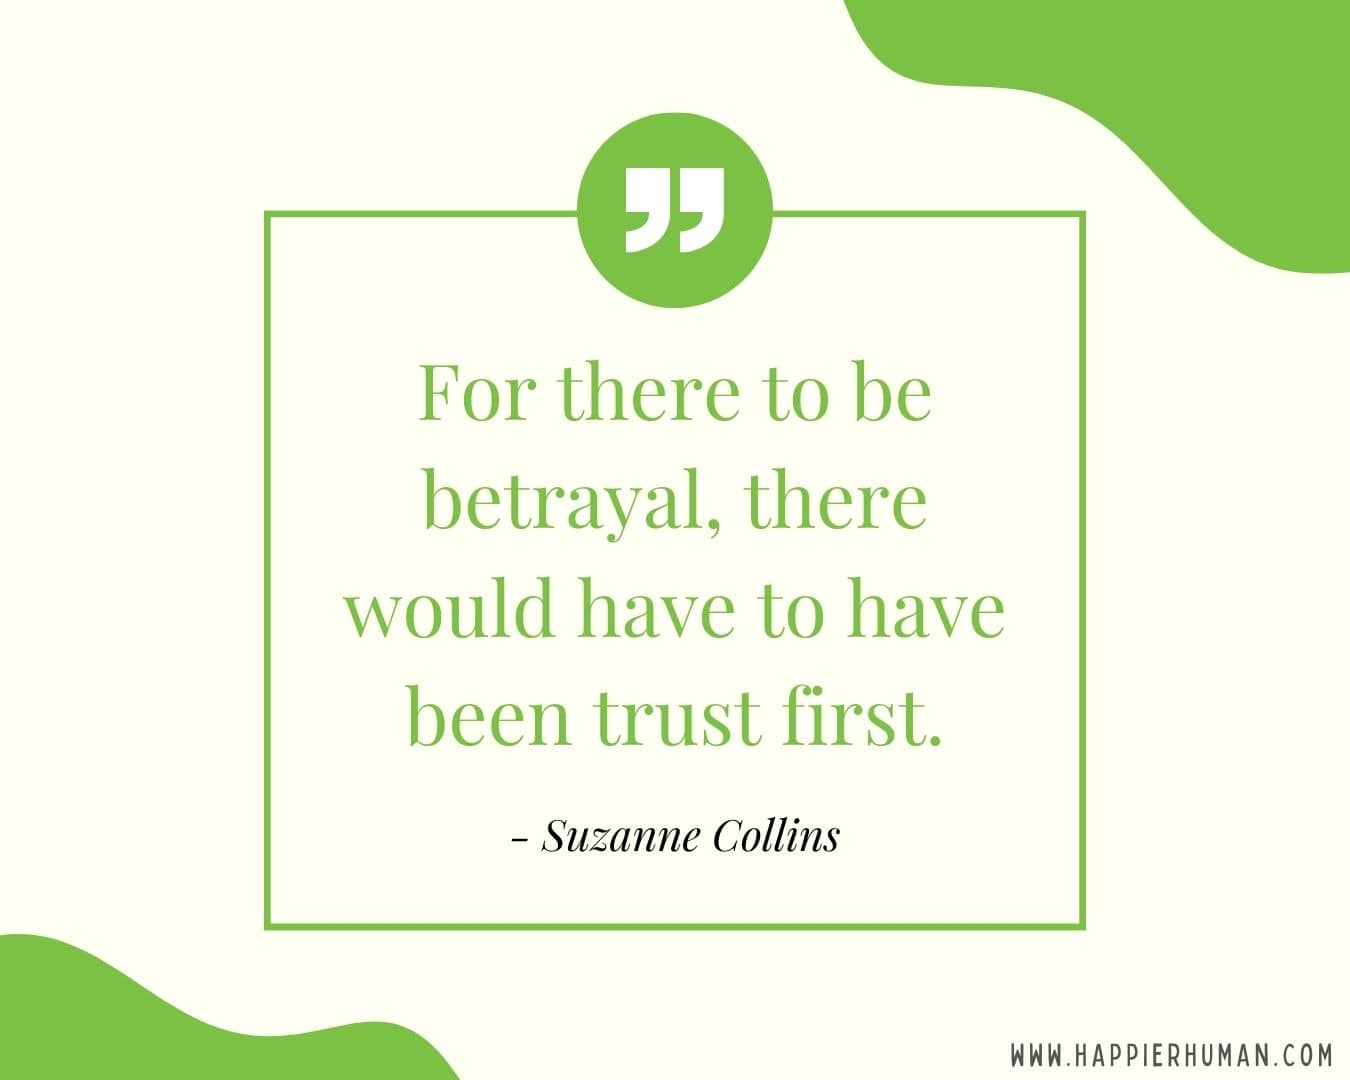 Broken Trust Quotes - “For there to be betrayal, there would have to have been trust first.” - Suzanne Collins